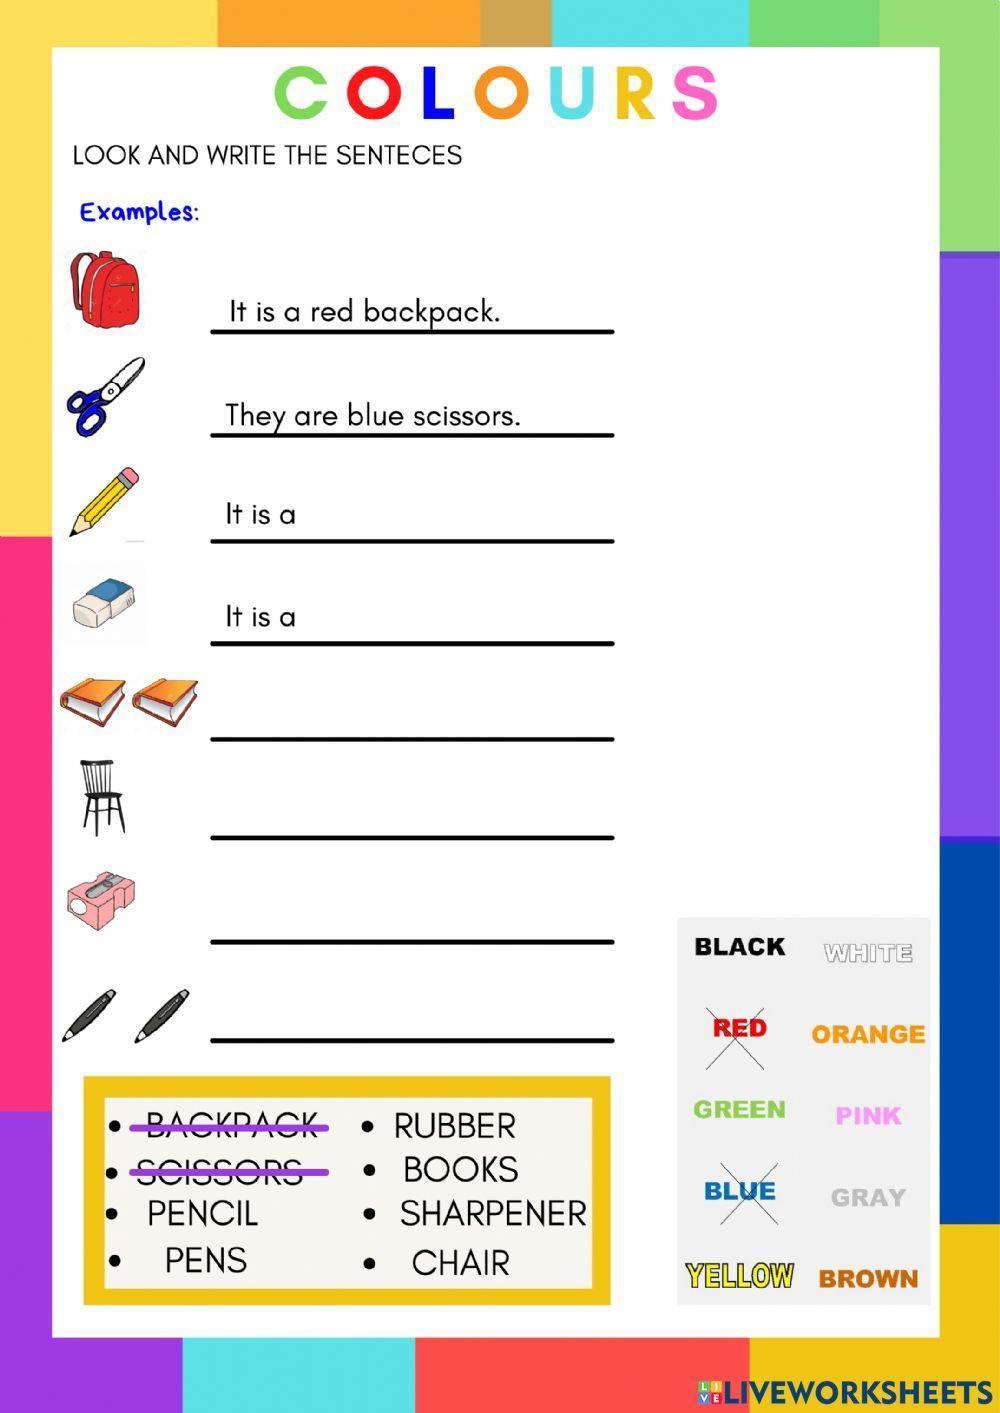 Colours and classroom objects